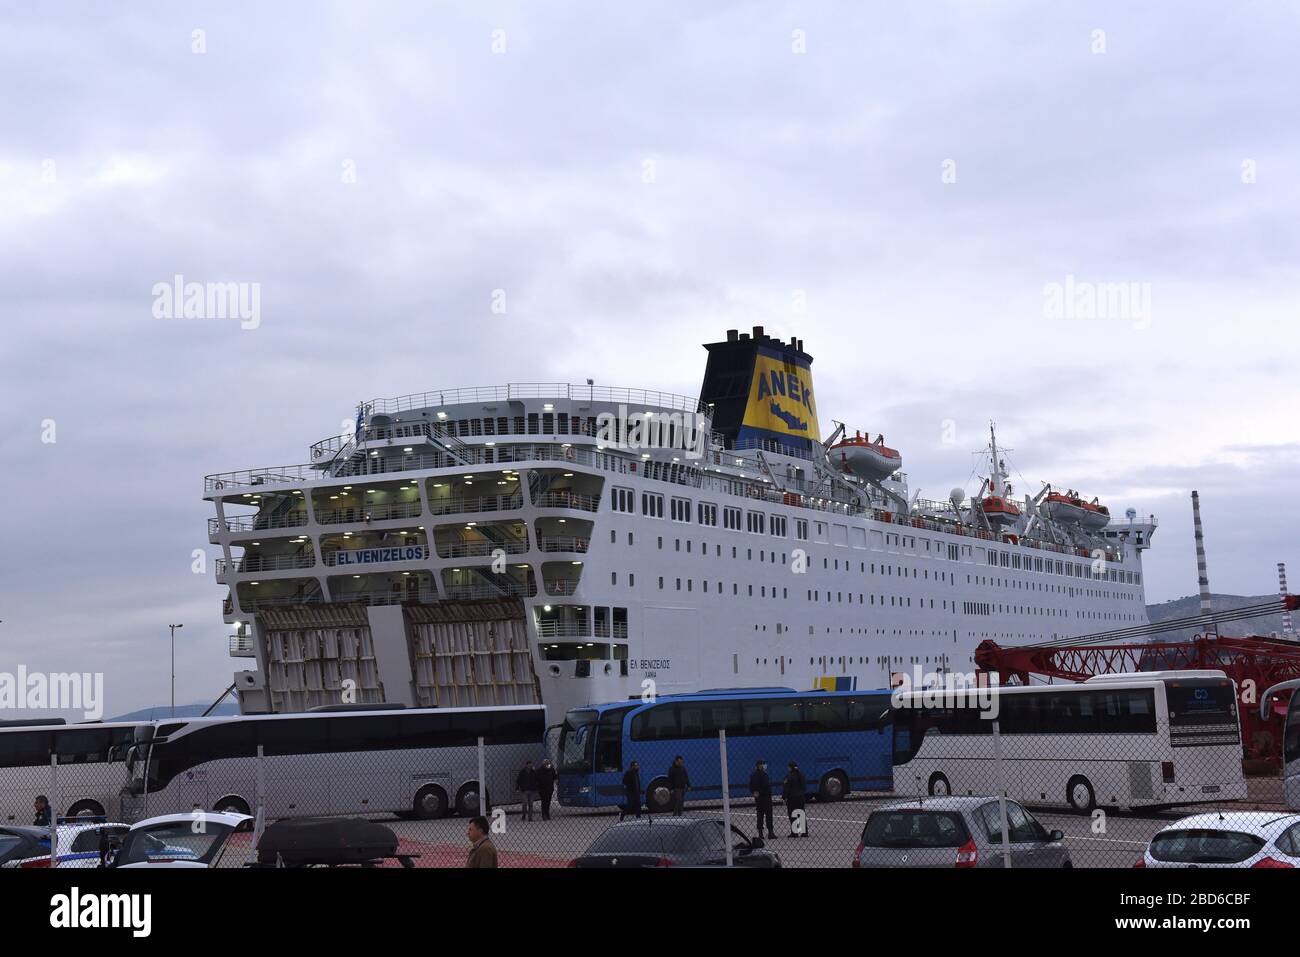 View of El. Venizelos ship, which is in quarantine due to covid-19, with buses for the departure of people that are healthy. (Photo by Dimitrios Karvountzis/Pacific Press) Stock Photo